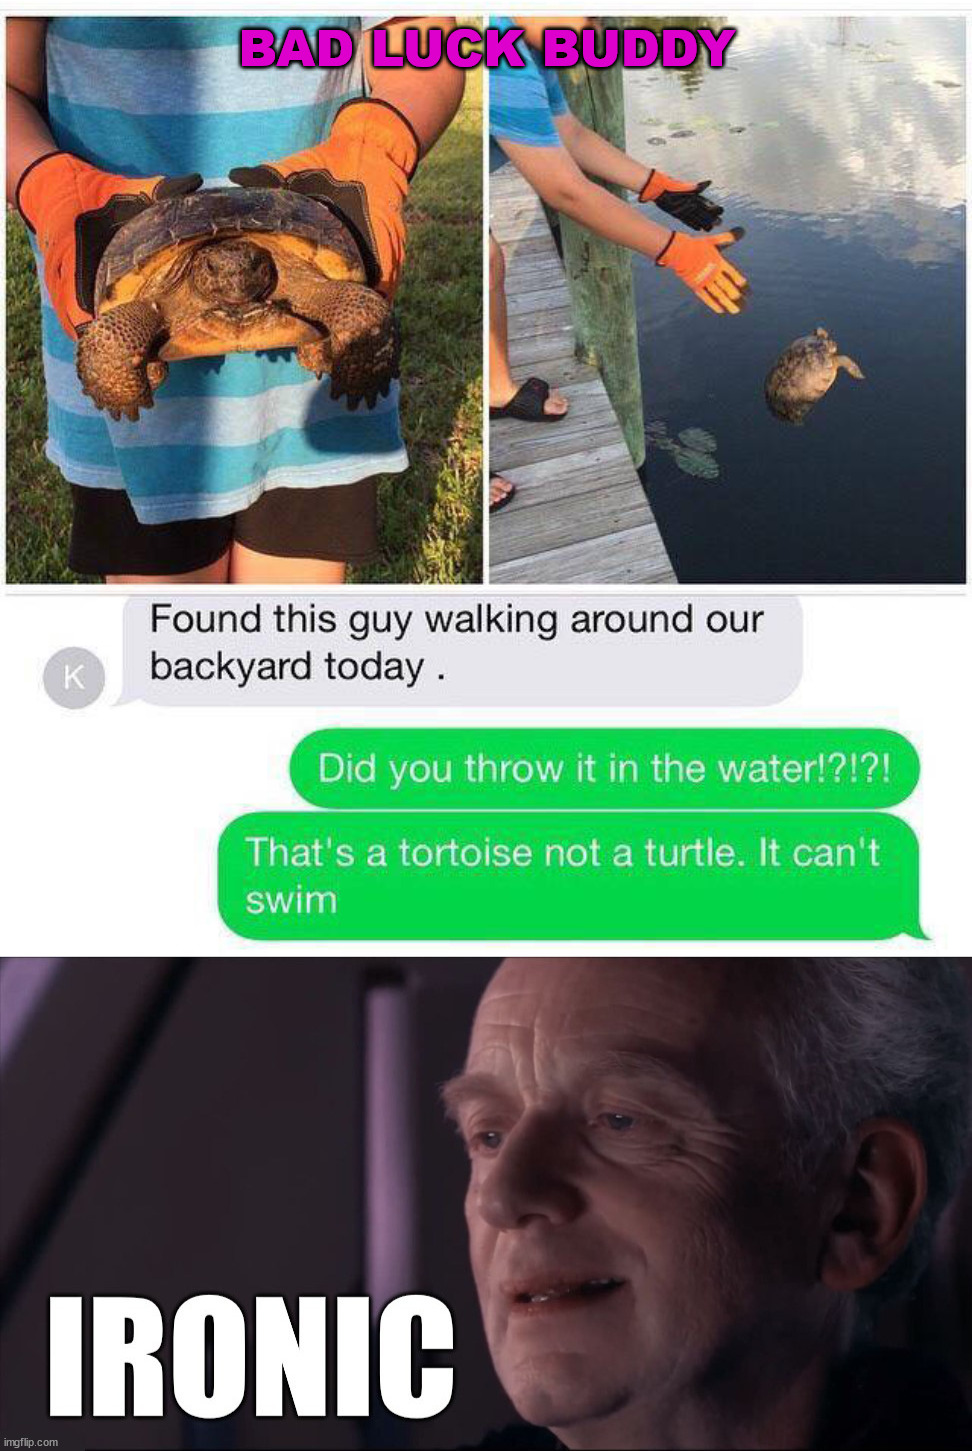 Not a good time for the tortoise. |  BAD LUCK BUDDY | image tagged in tortoise,just keep swimming,fails,irony | made w/ Imgflip meme maker